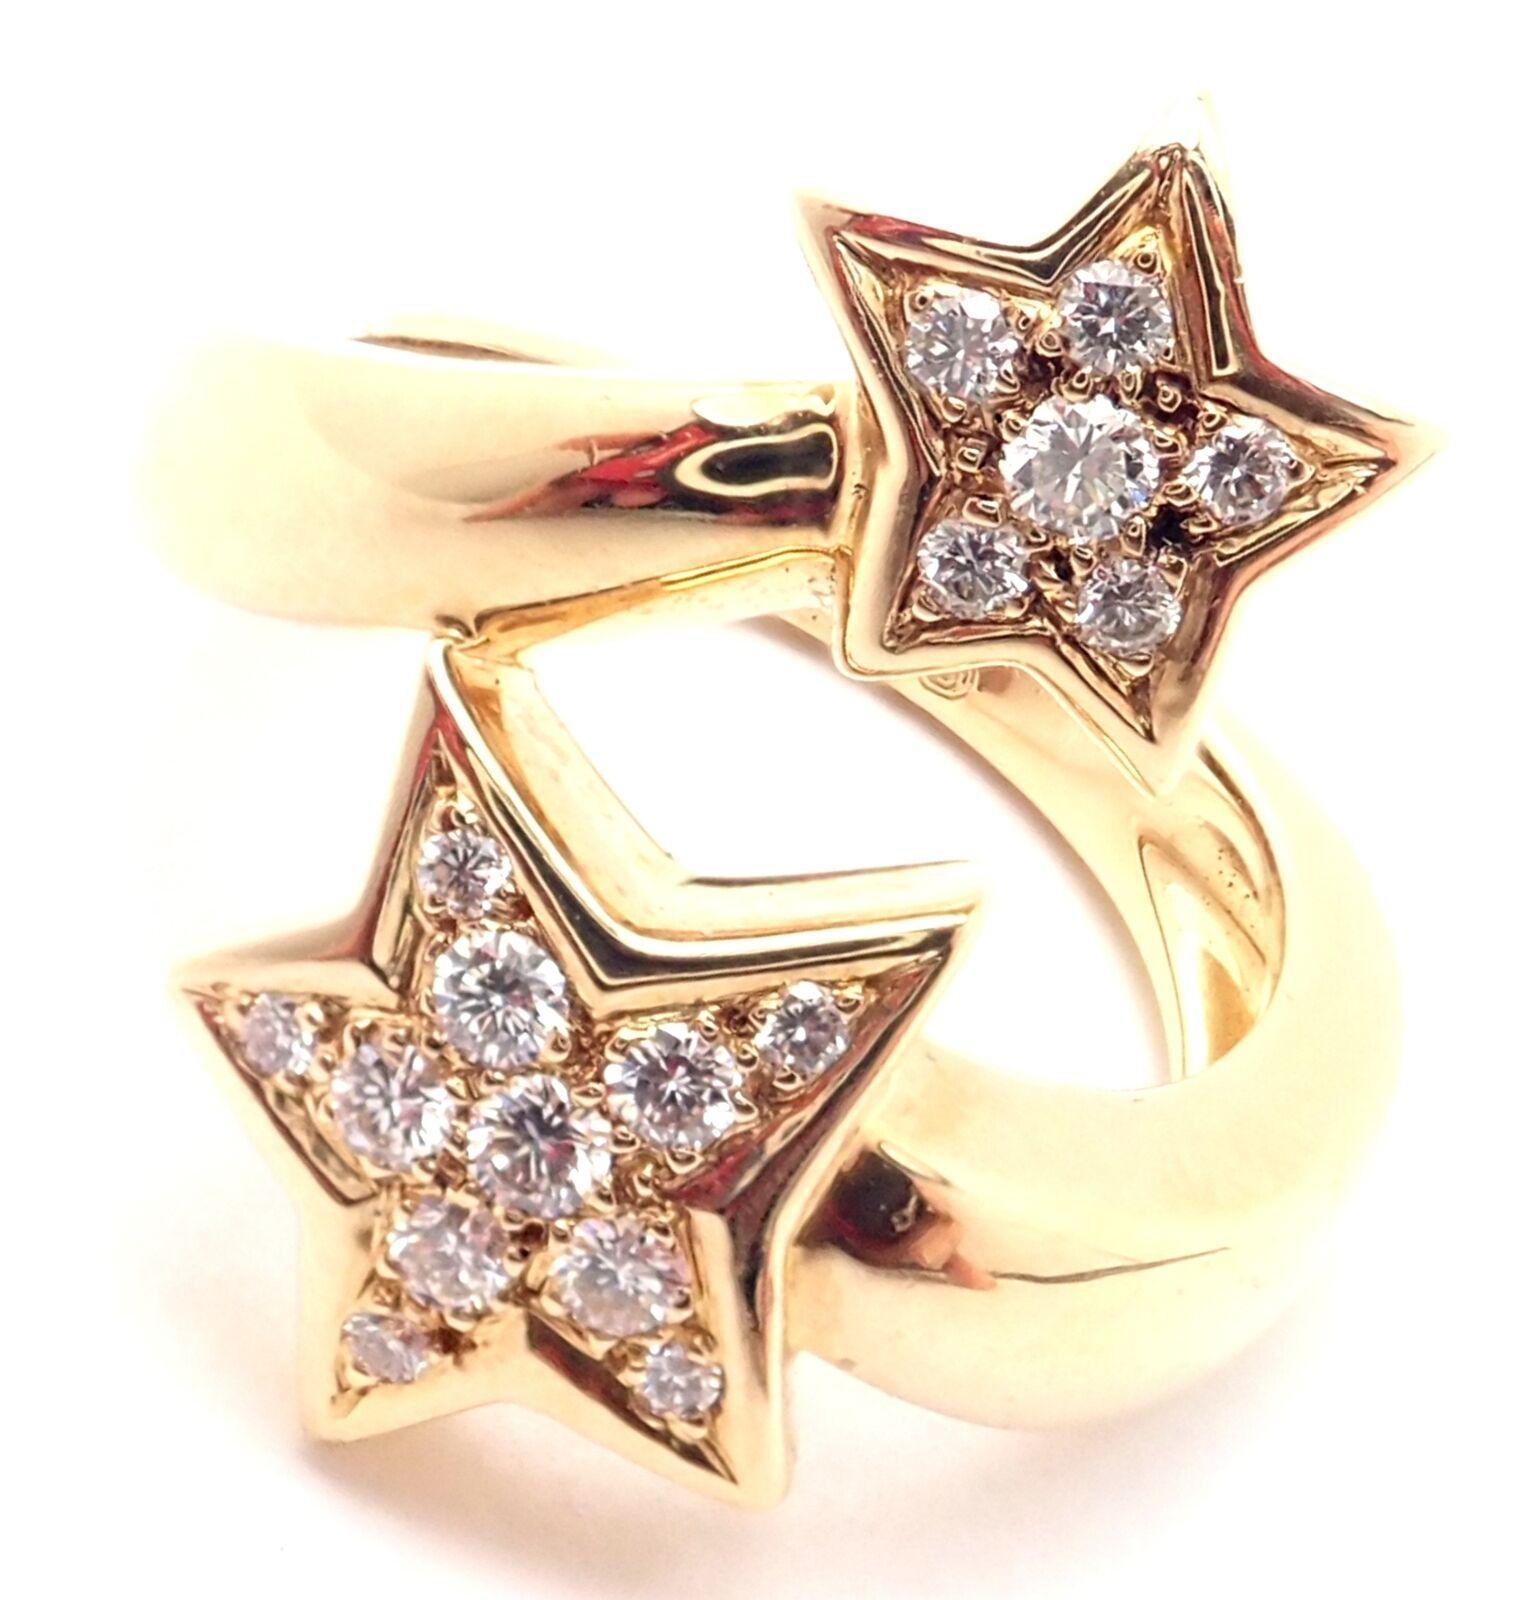 18k Yellow Gold Comete Star Diamond Ring by Chanel.
With 17 round brilliant cut diamonds, VS1 clarity, G color. Total Diamond Weight: .34ct. 
Details:
Size: 5 3/4
Width: 22mm
Weight: 8.4 grams
Stamped Hallmarks: Chanel 750 7I1122
*Free Shipping